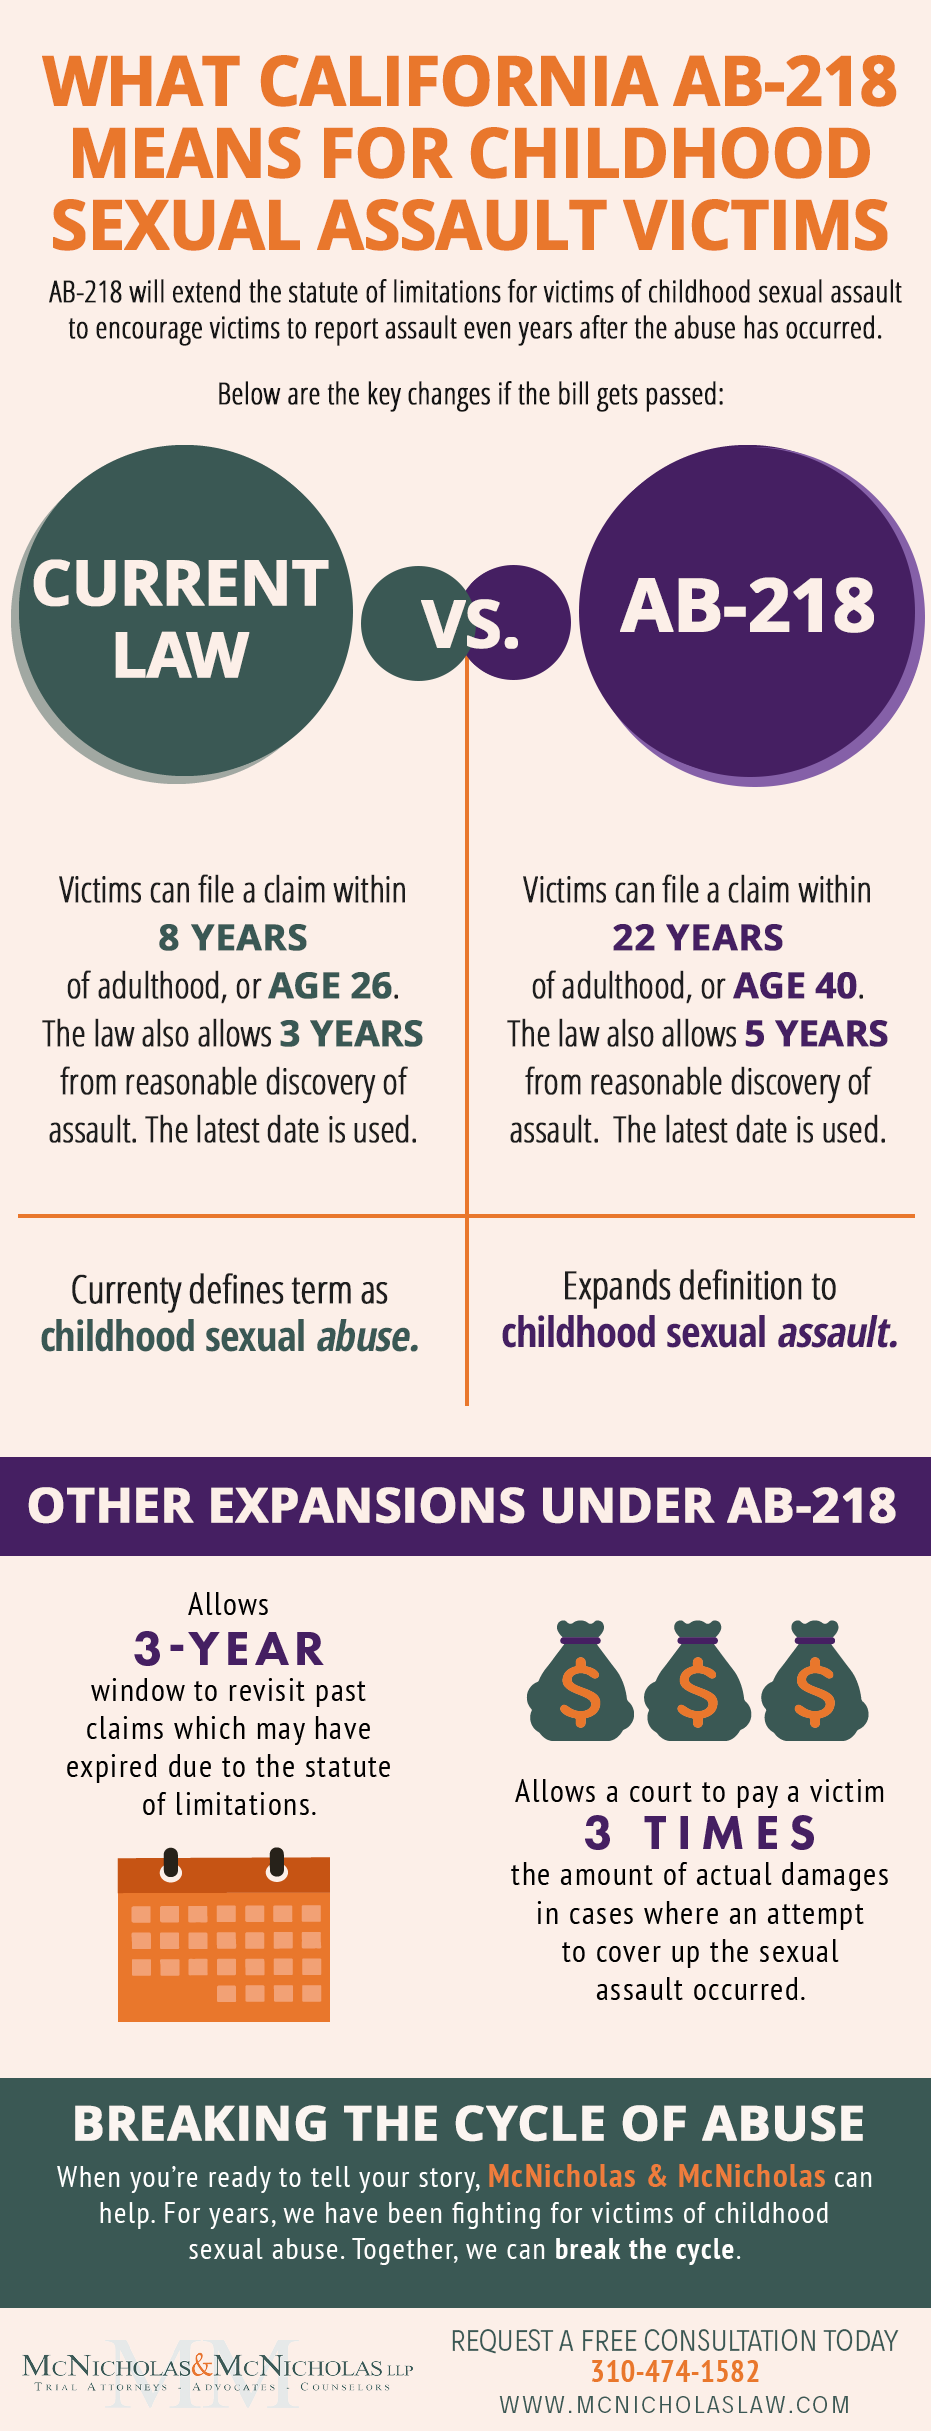 What California AB-218 means for childhood sexual assault victims?